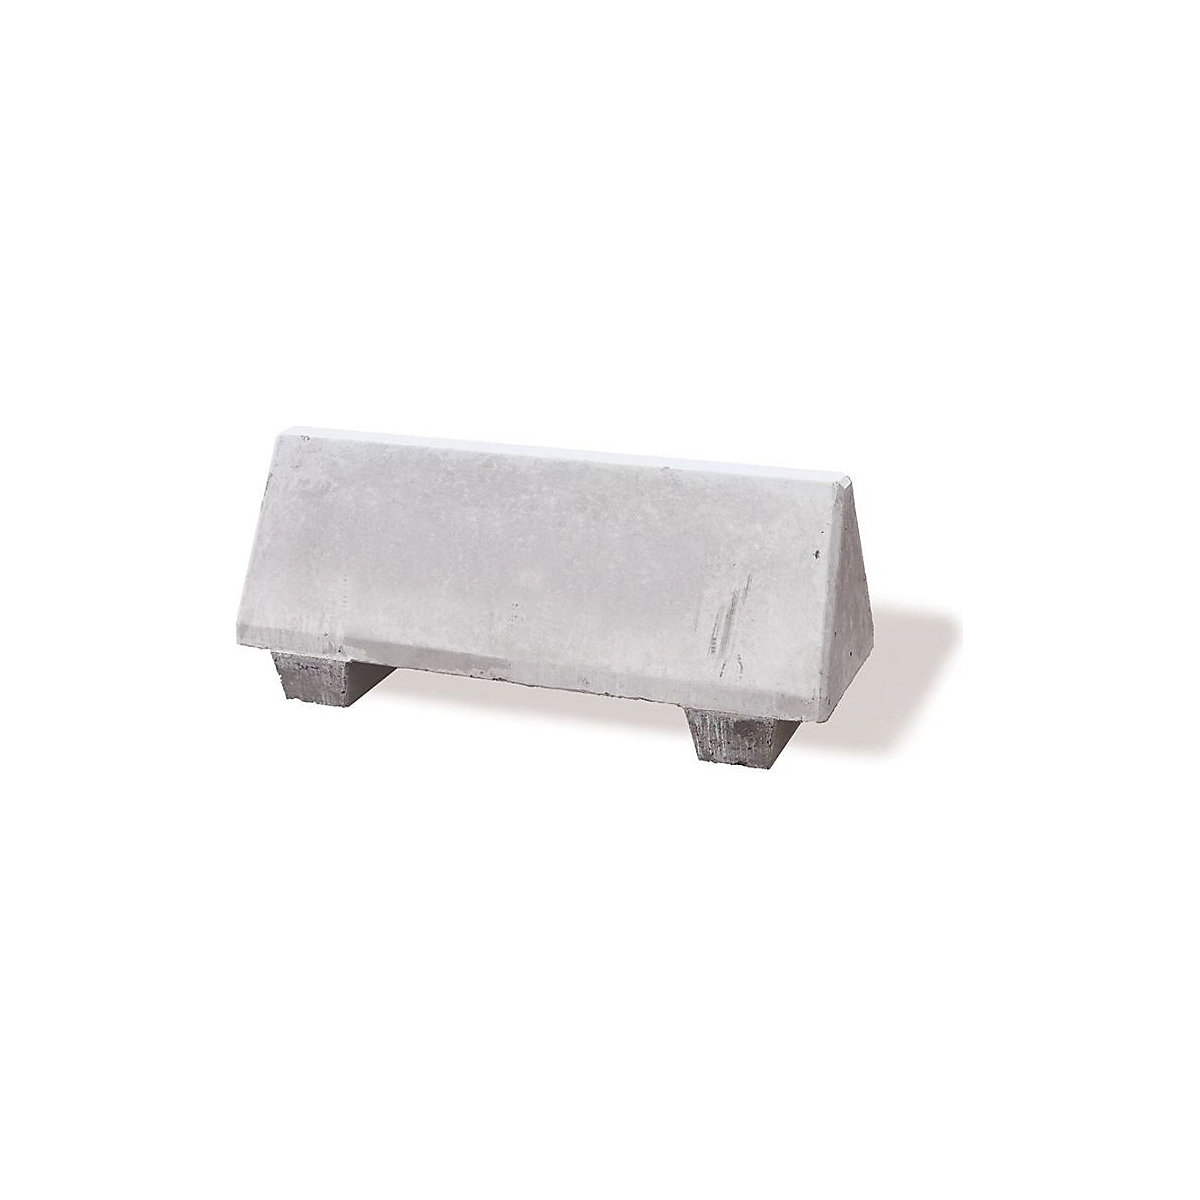 Concrete barrier, LxWxH 1090 x 390 x 465 mm, pack of 4, grey-1